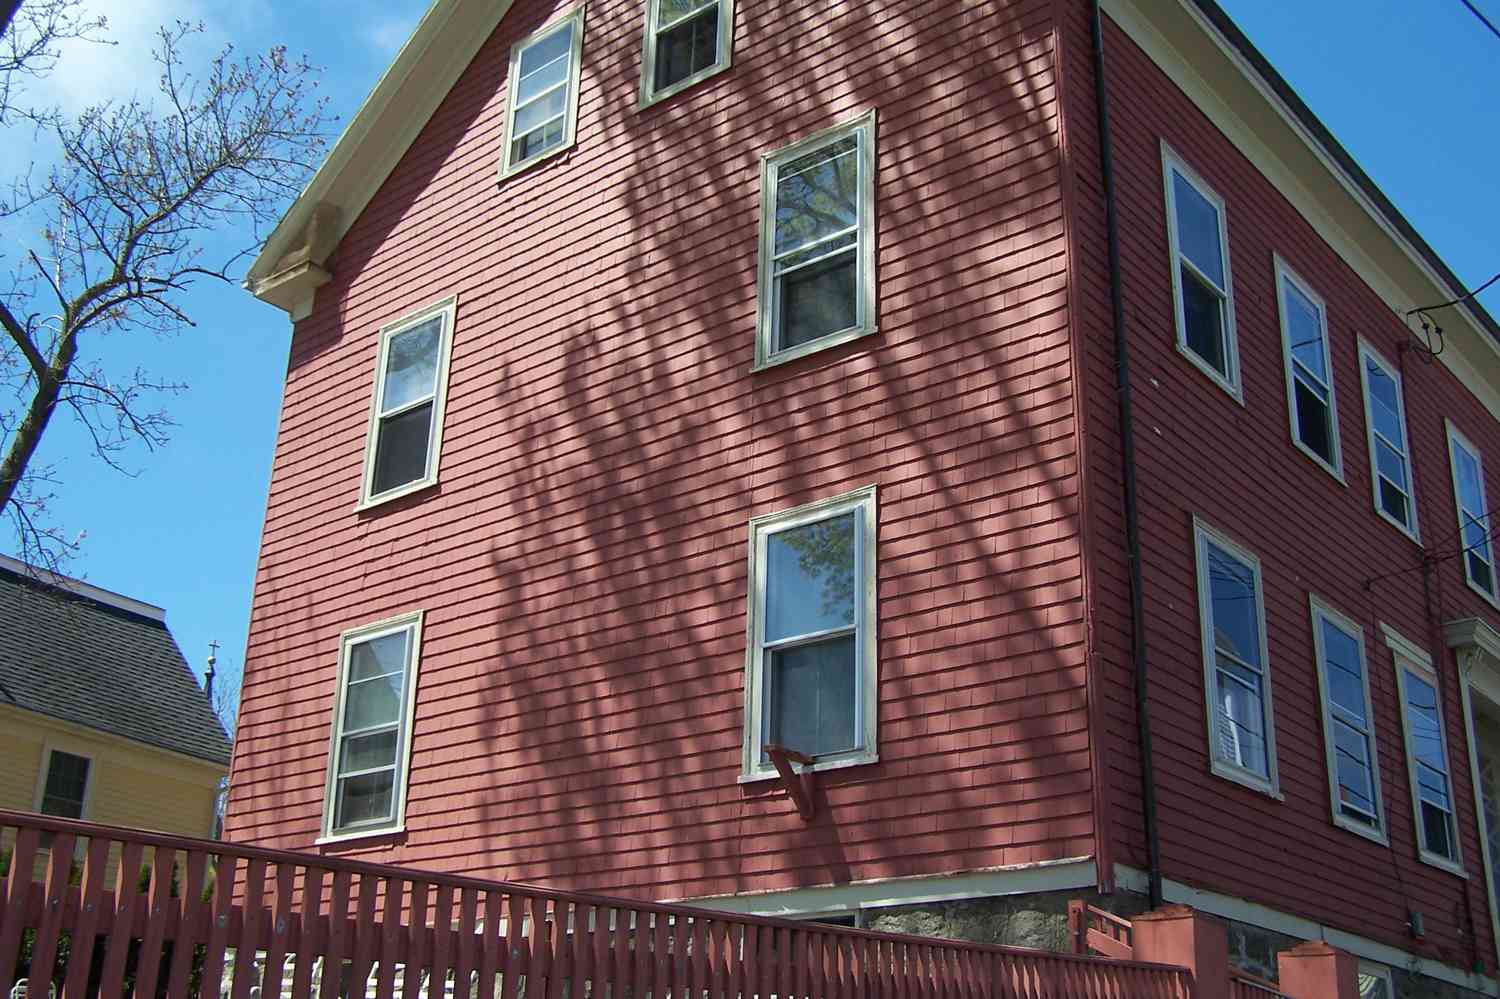 Large, two-story, pink-hued house in Salem, Massachusetts